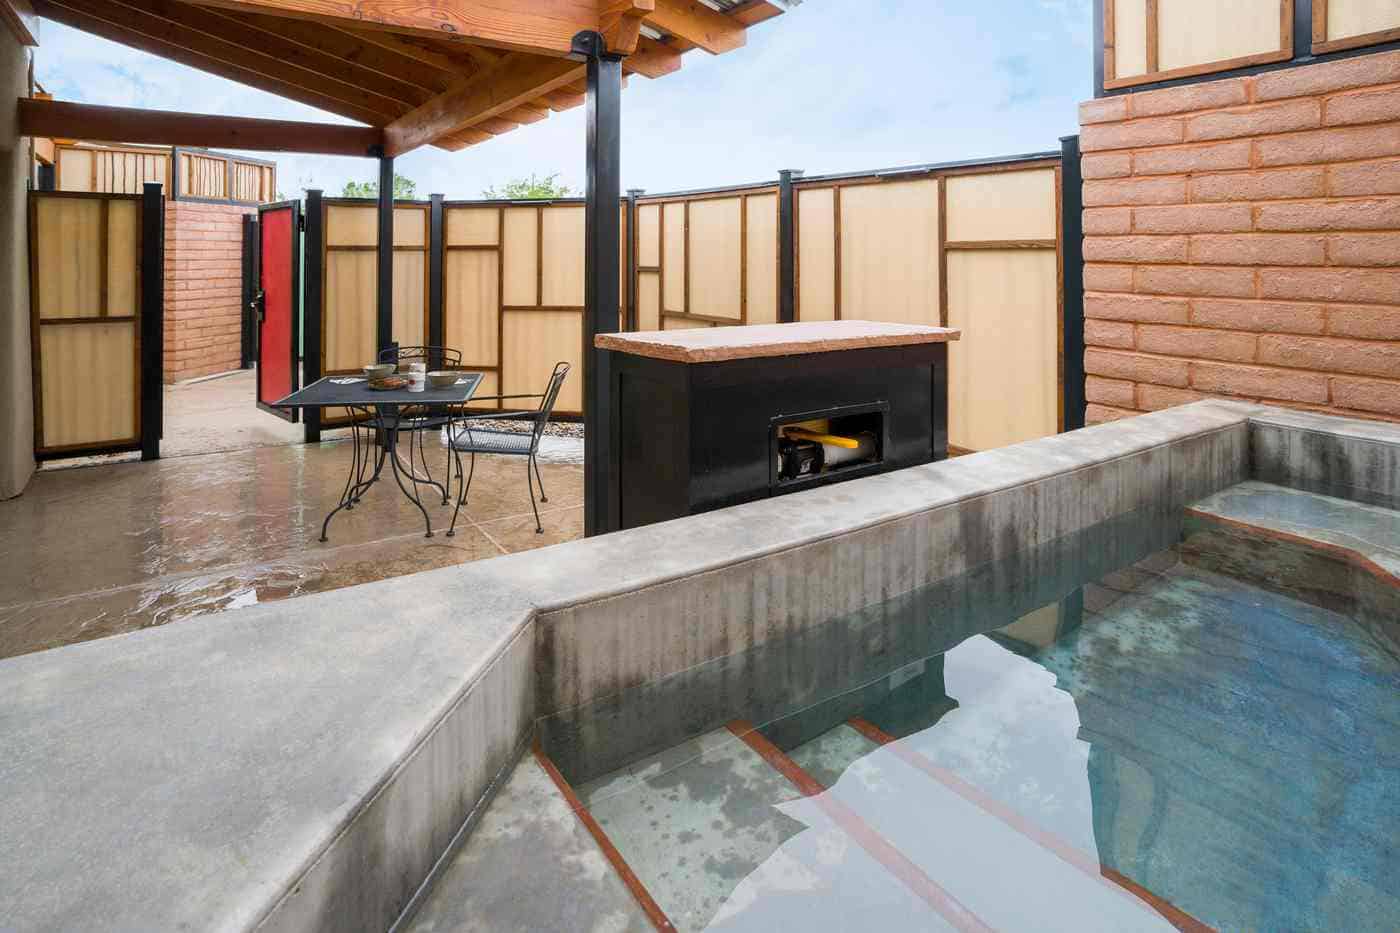 Private outdoor warm springs bath, I Dream of Jeannie Suite, Blackstone Hotsprings